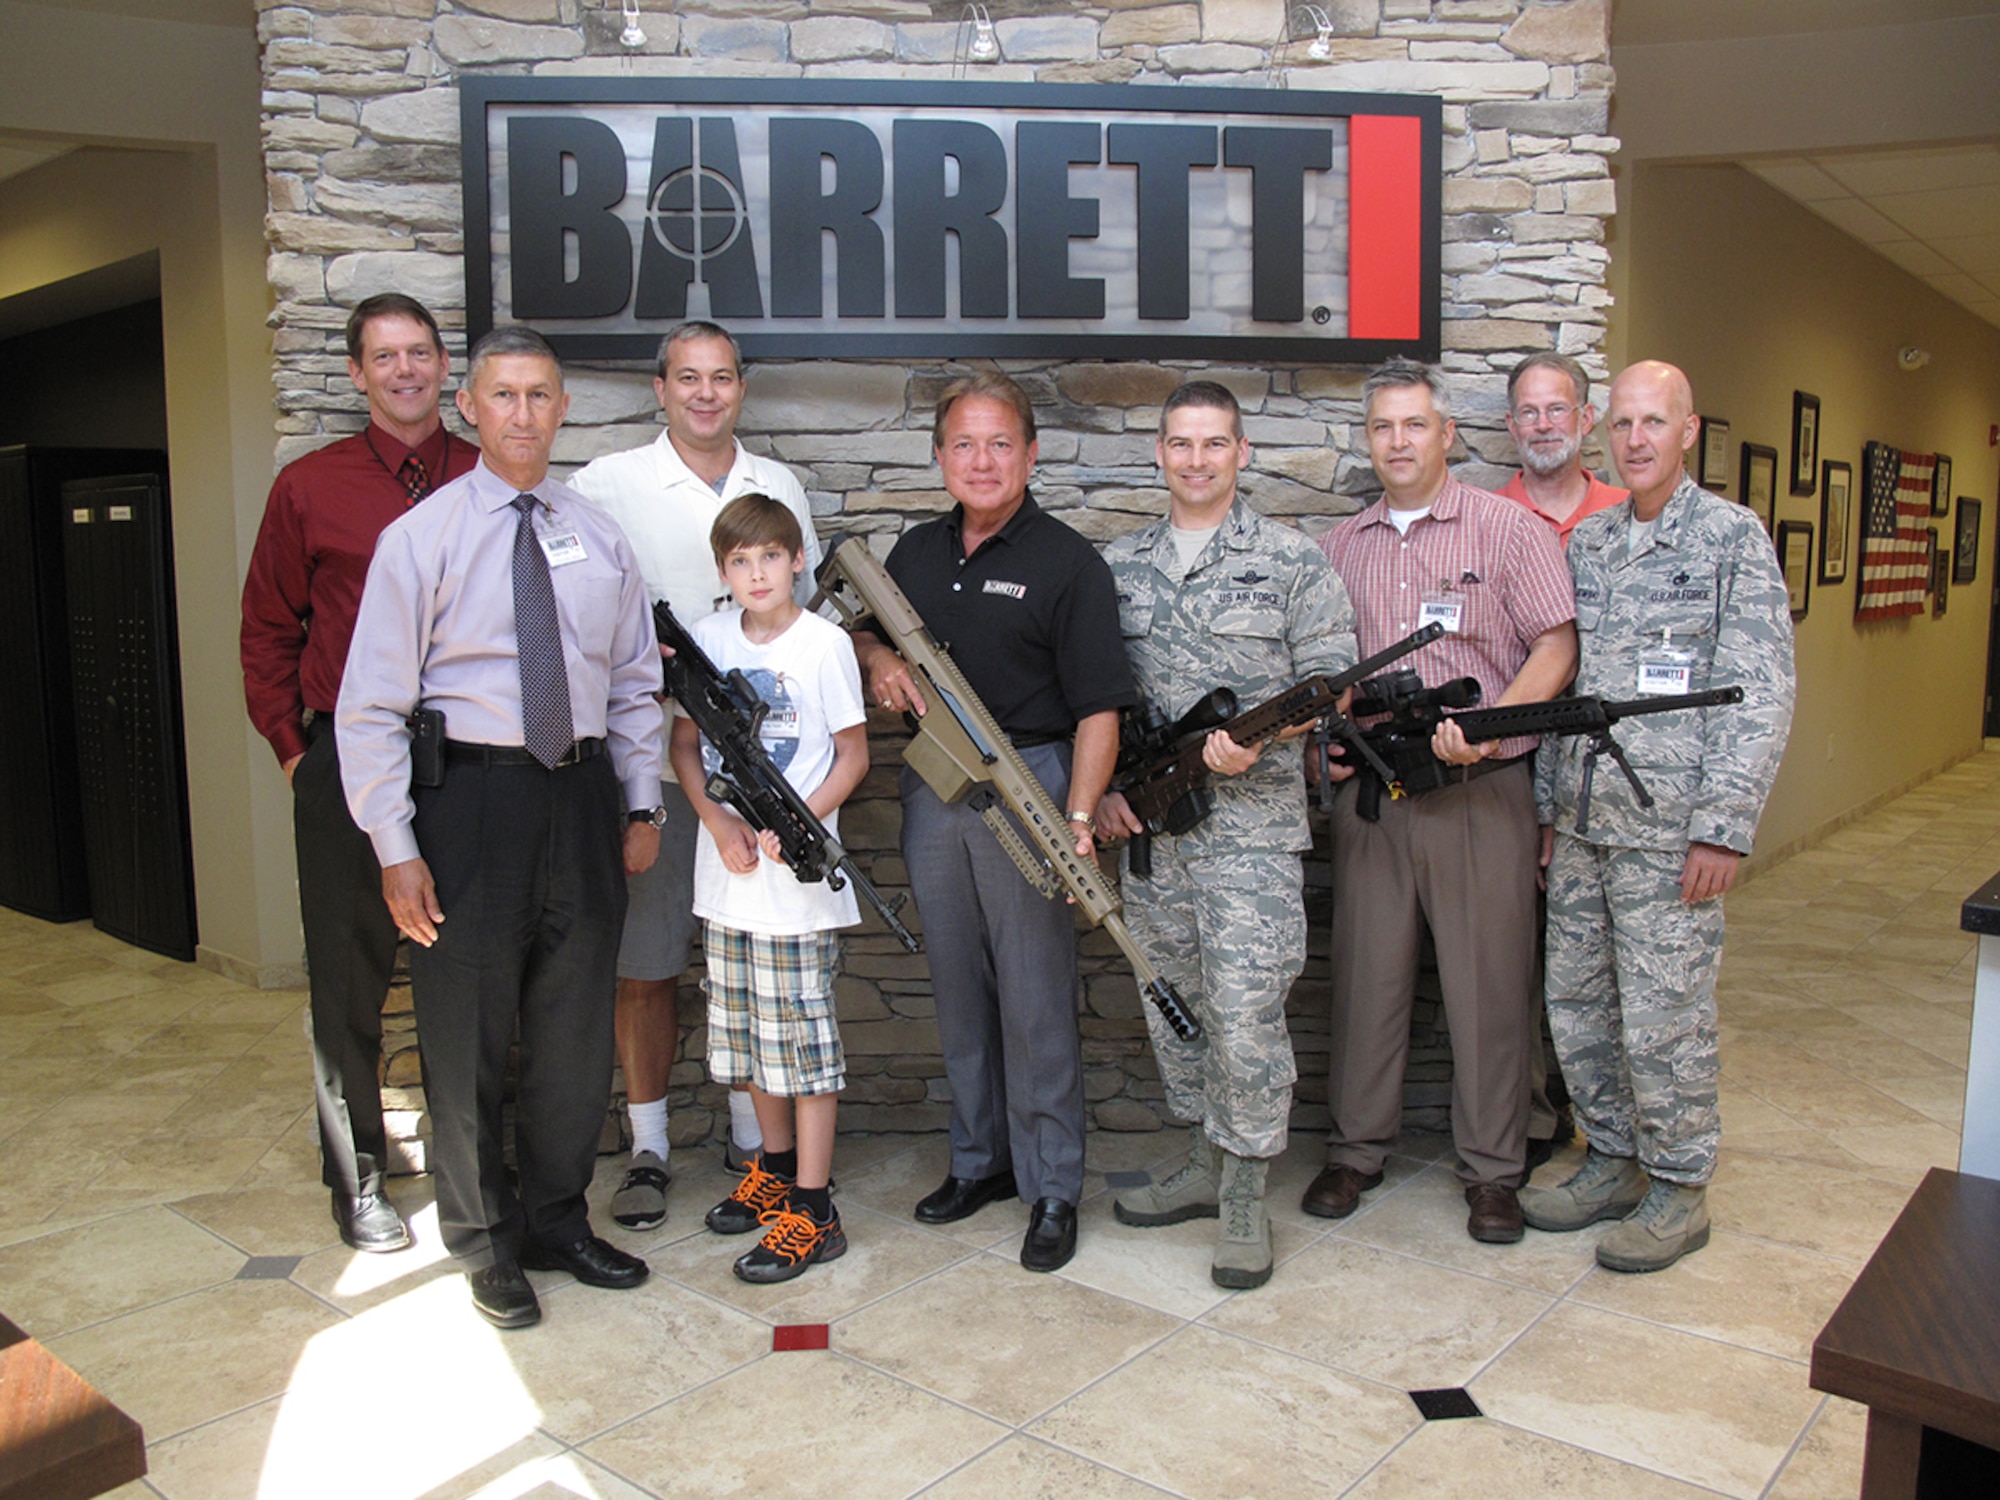 Left to right, AEDC Executive Director Douglas Blake, AEDC Chief of Staff Ken Jacobsen, Tennessee Representative Judd Matheny, Judd’s son Aulden, Barrett’s Firearms Manufacturing Inc. CEO Ronnie Barrett, AEDC Commander Col. Raymond Toth, AEDC Historian Chris Rumley, Matheny’s visitor Steve Chester and AEDC Test Support Division Director Col. James Krajewski take a break during AEDC’s recent visit to the Barrett Firearms factory near Murfreesboro. (Photo by Claude Morse)